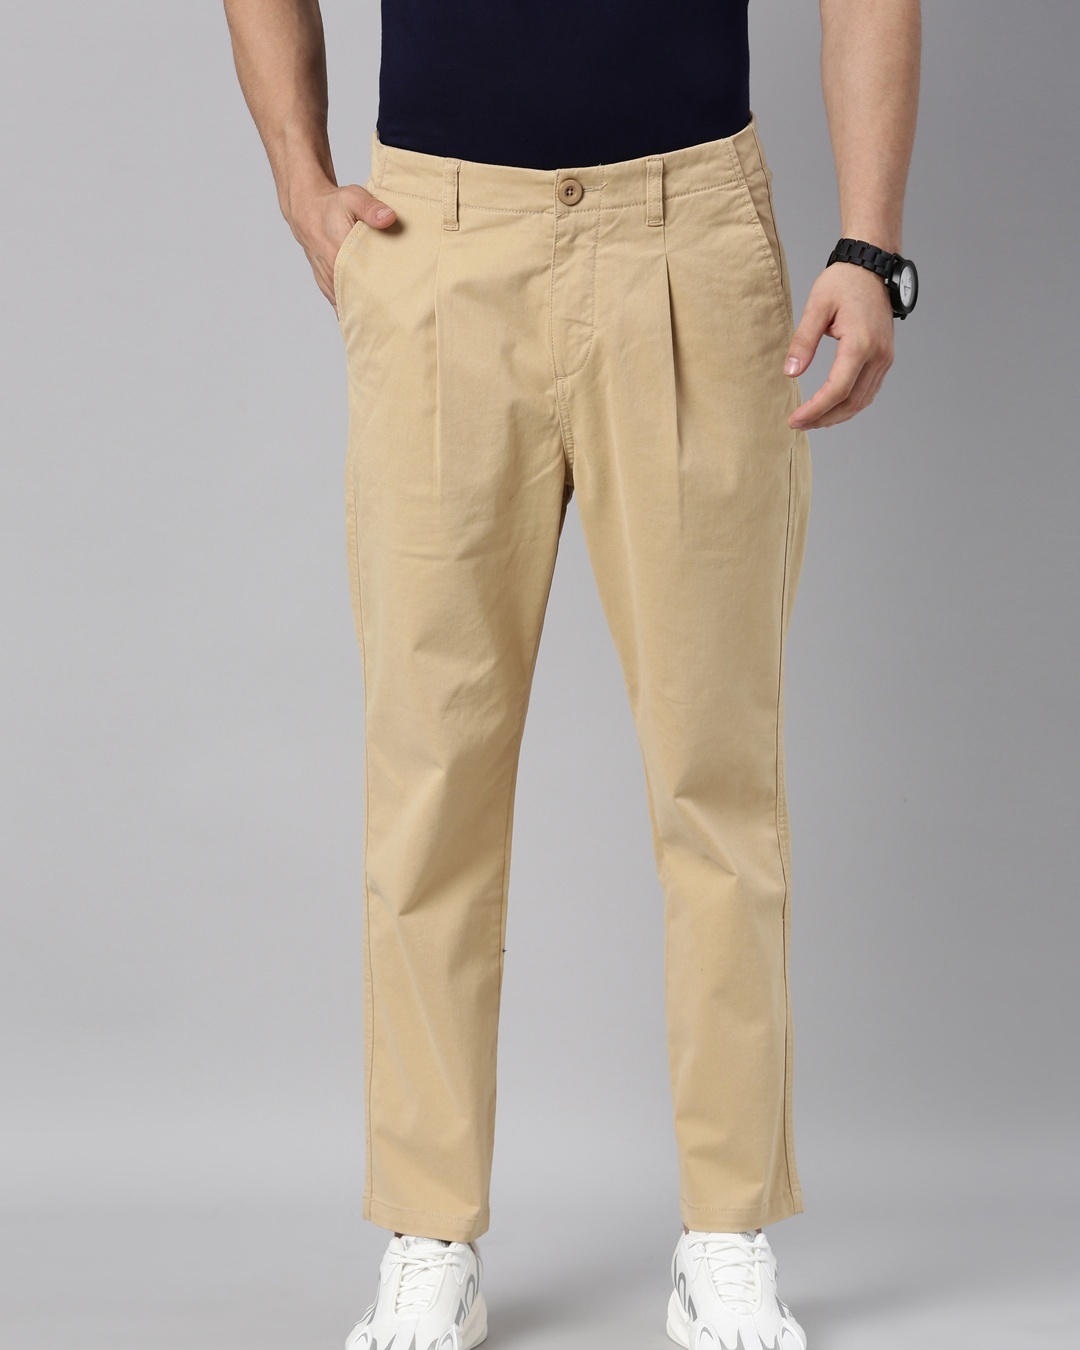 Buy Men's Beige Relaxed Fit Trousers Online at Bewakoof